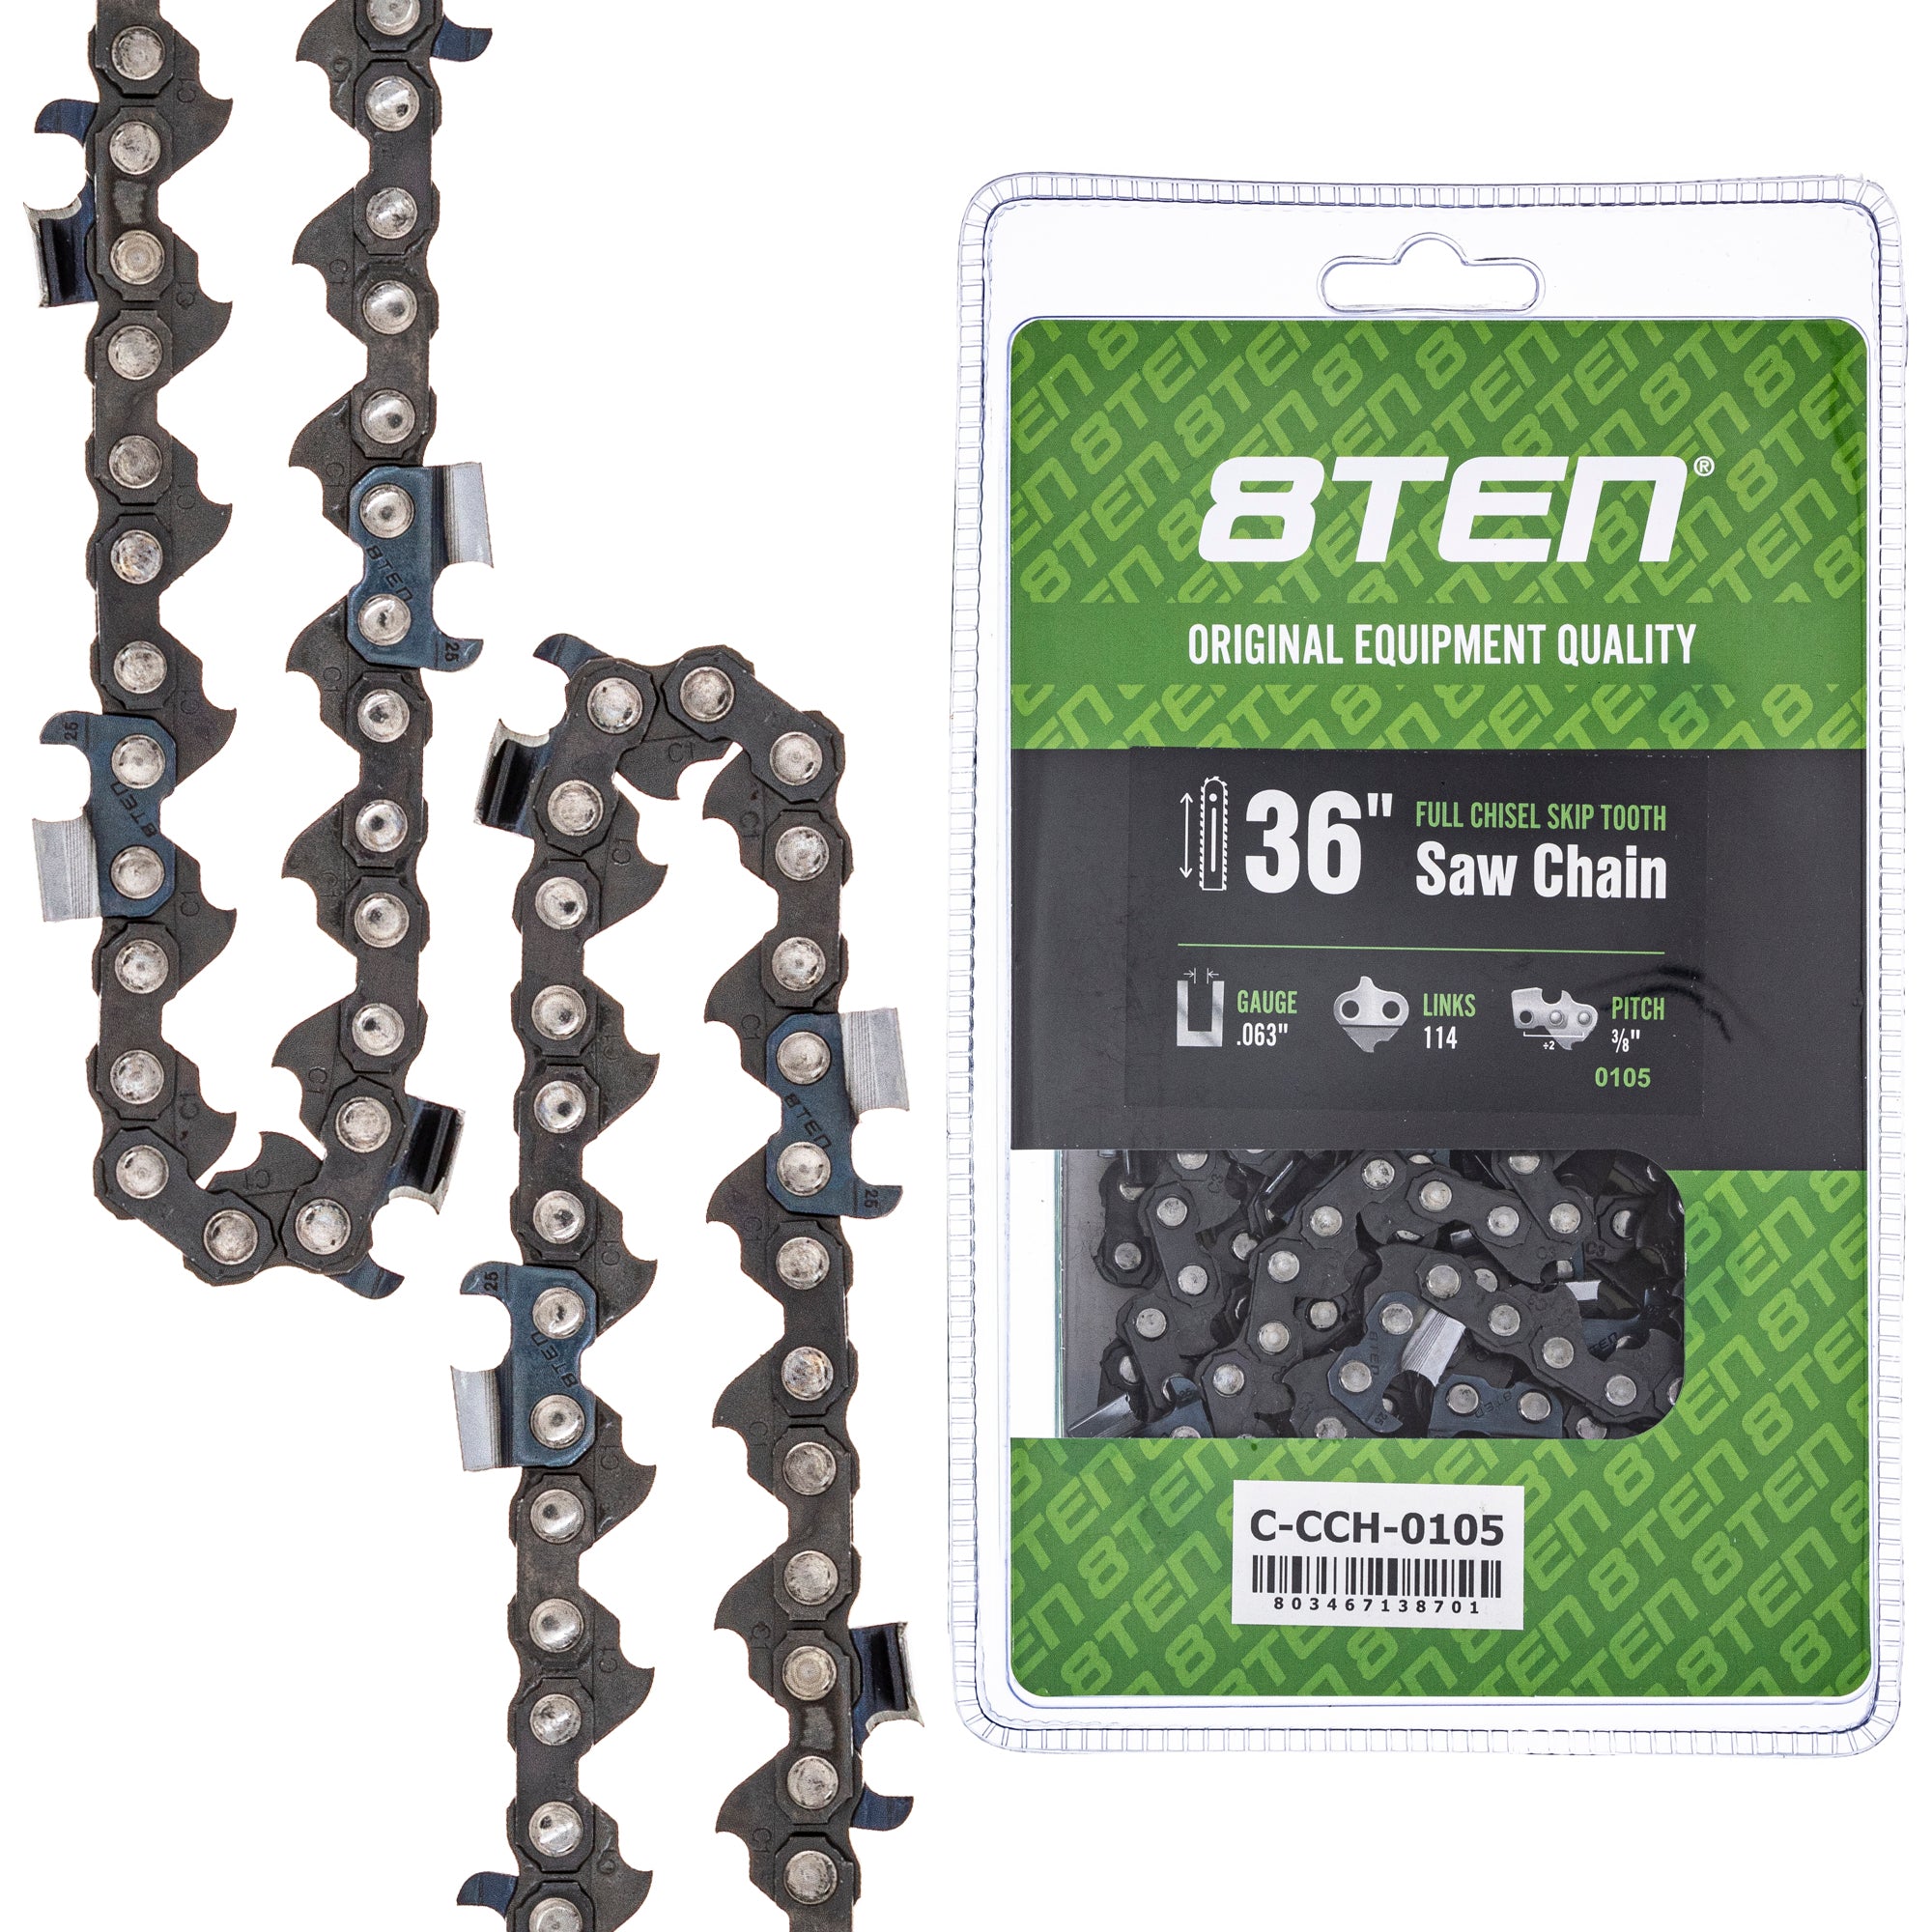 8TEN 810-CCC2327H Chain for zOTHER MSE MS E 634